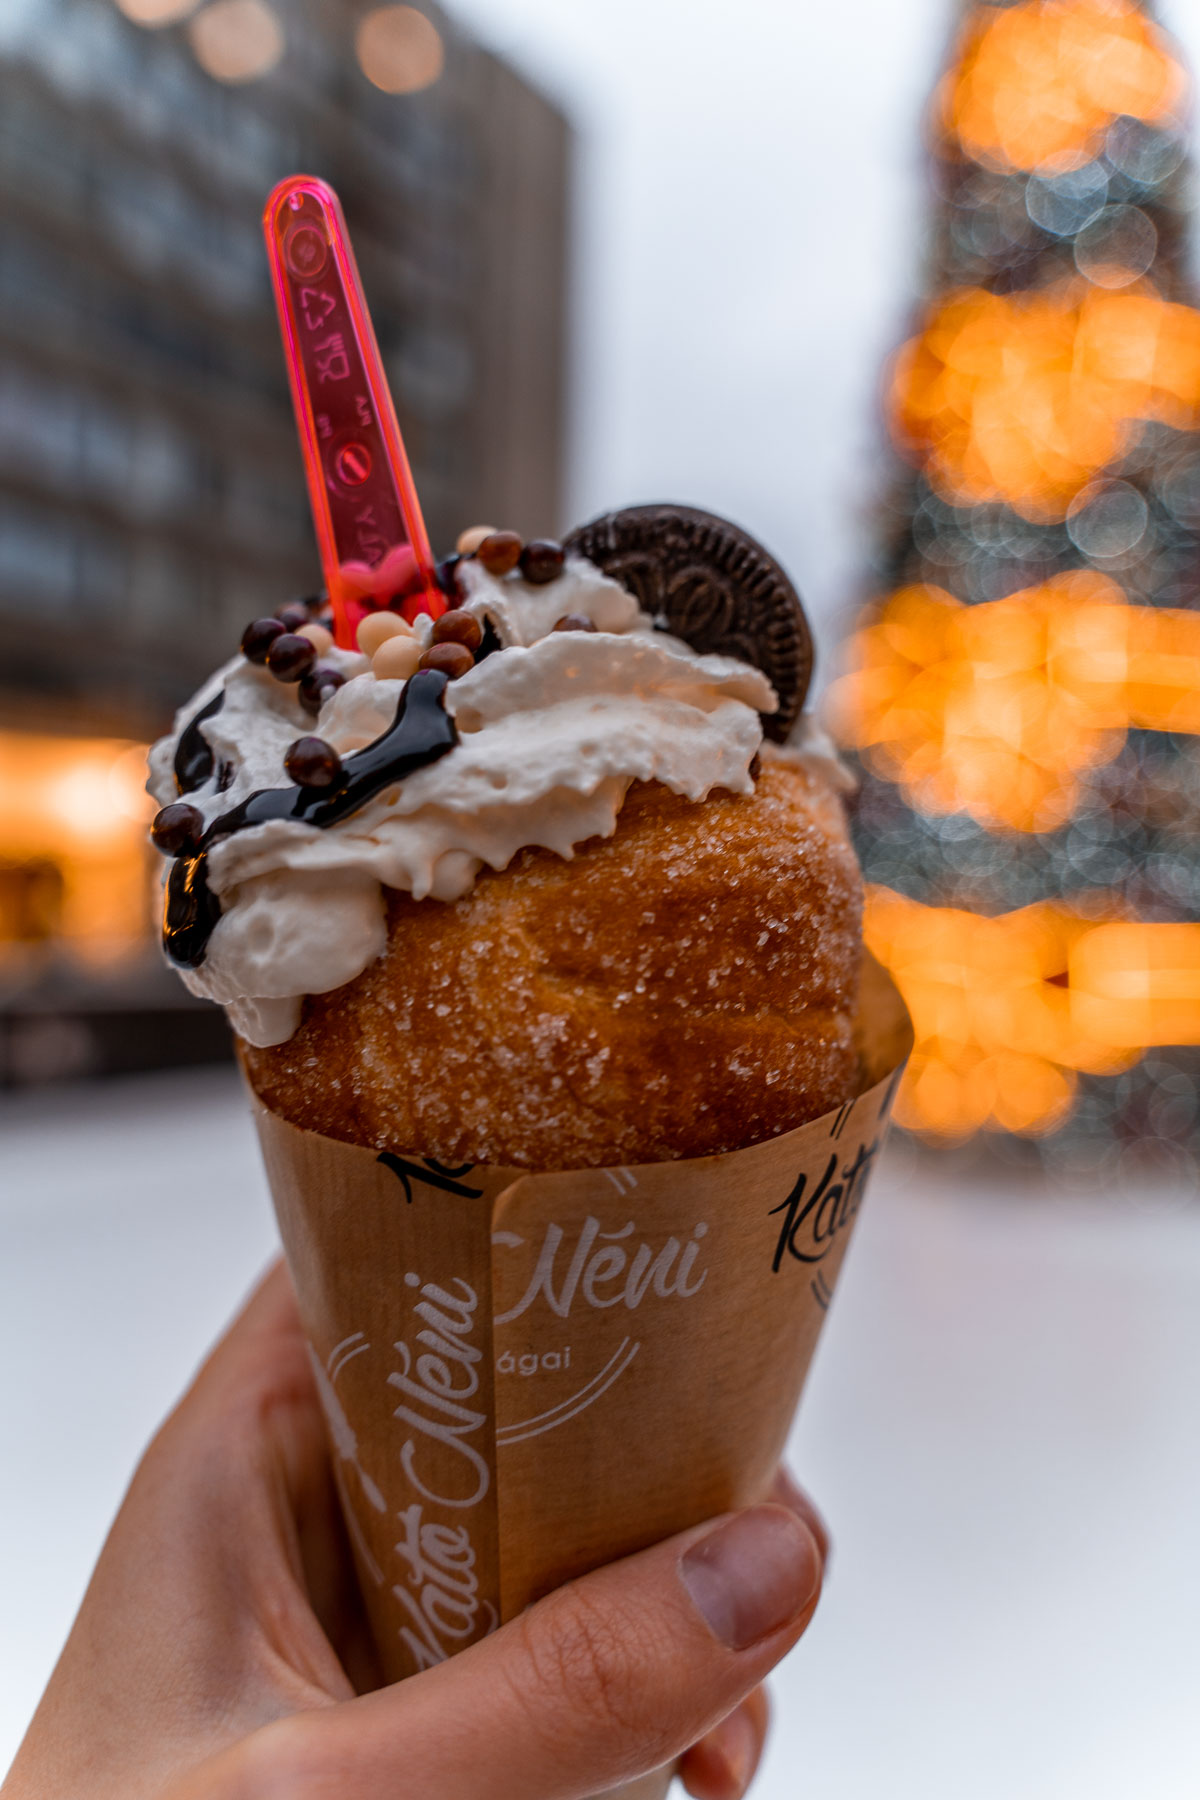 Chimney cake with ice cream at the Christmas markets in Budapest